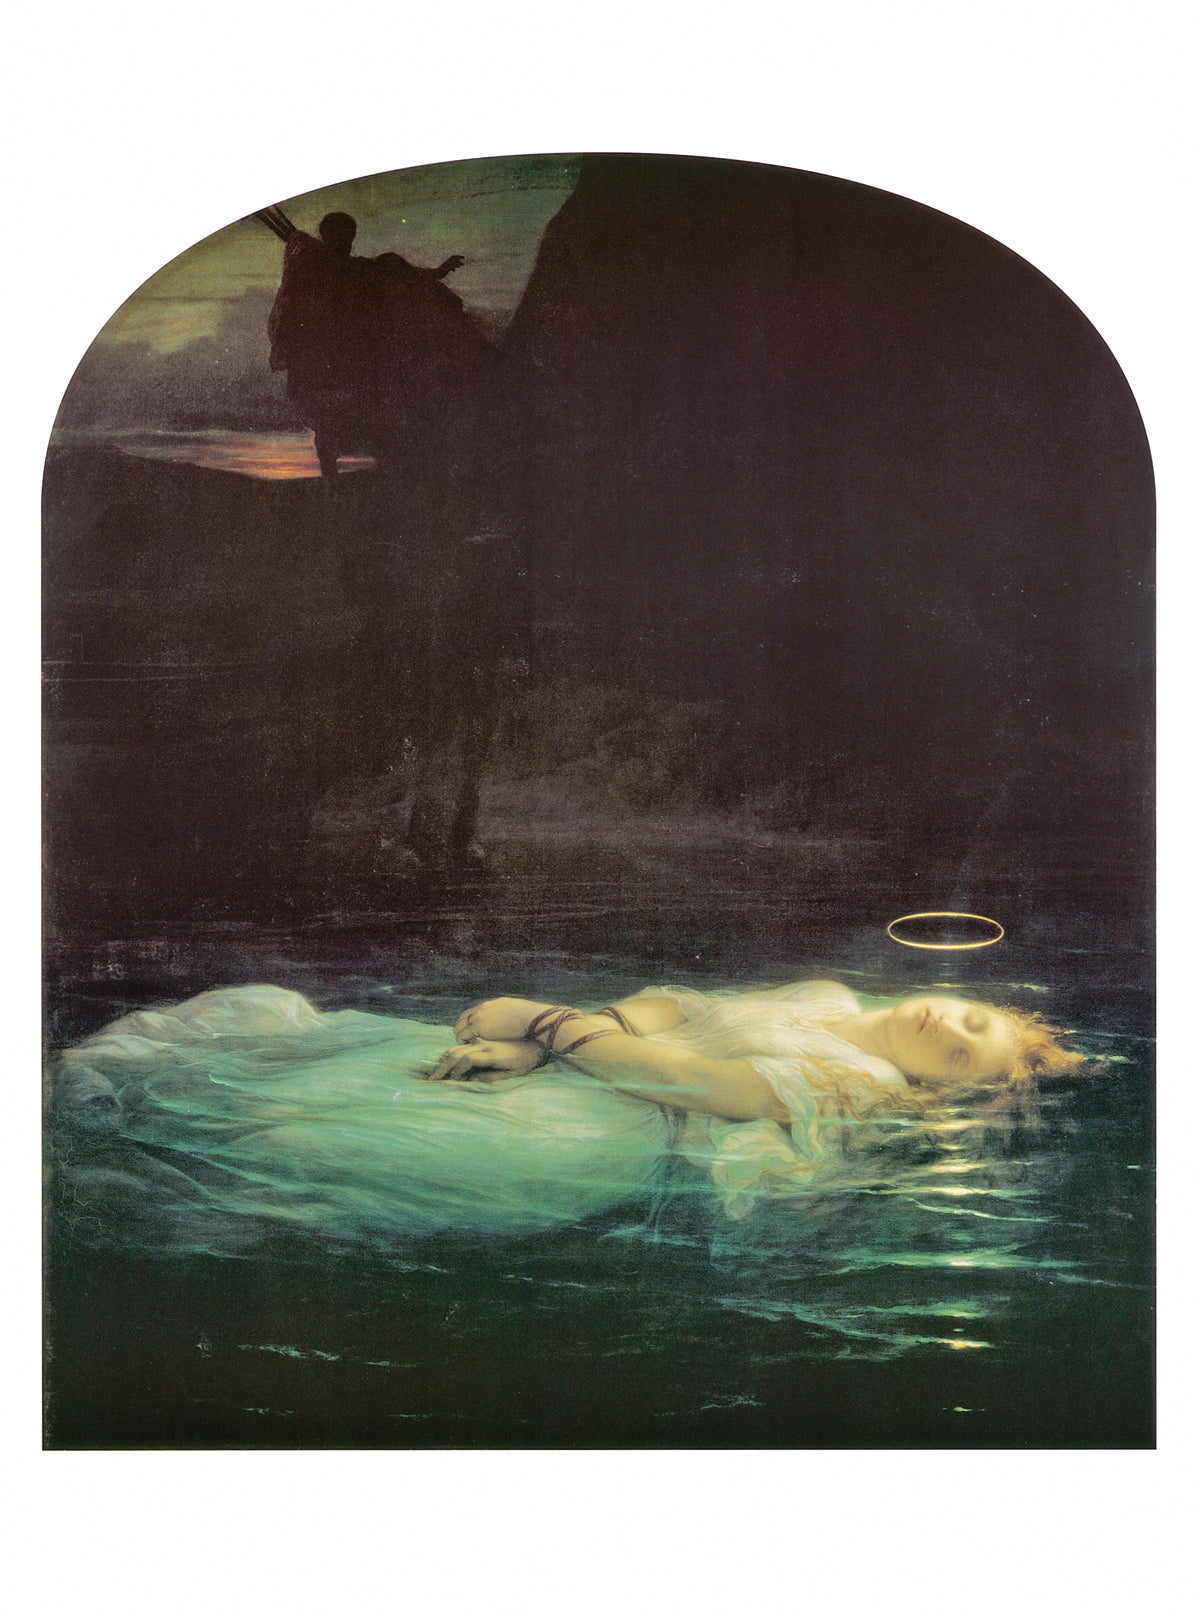 Hippolyte Paul Delaroche - The Young Martyr, 1855